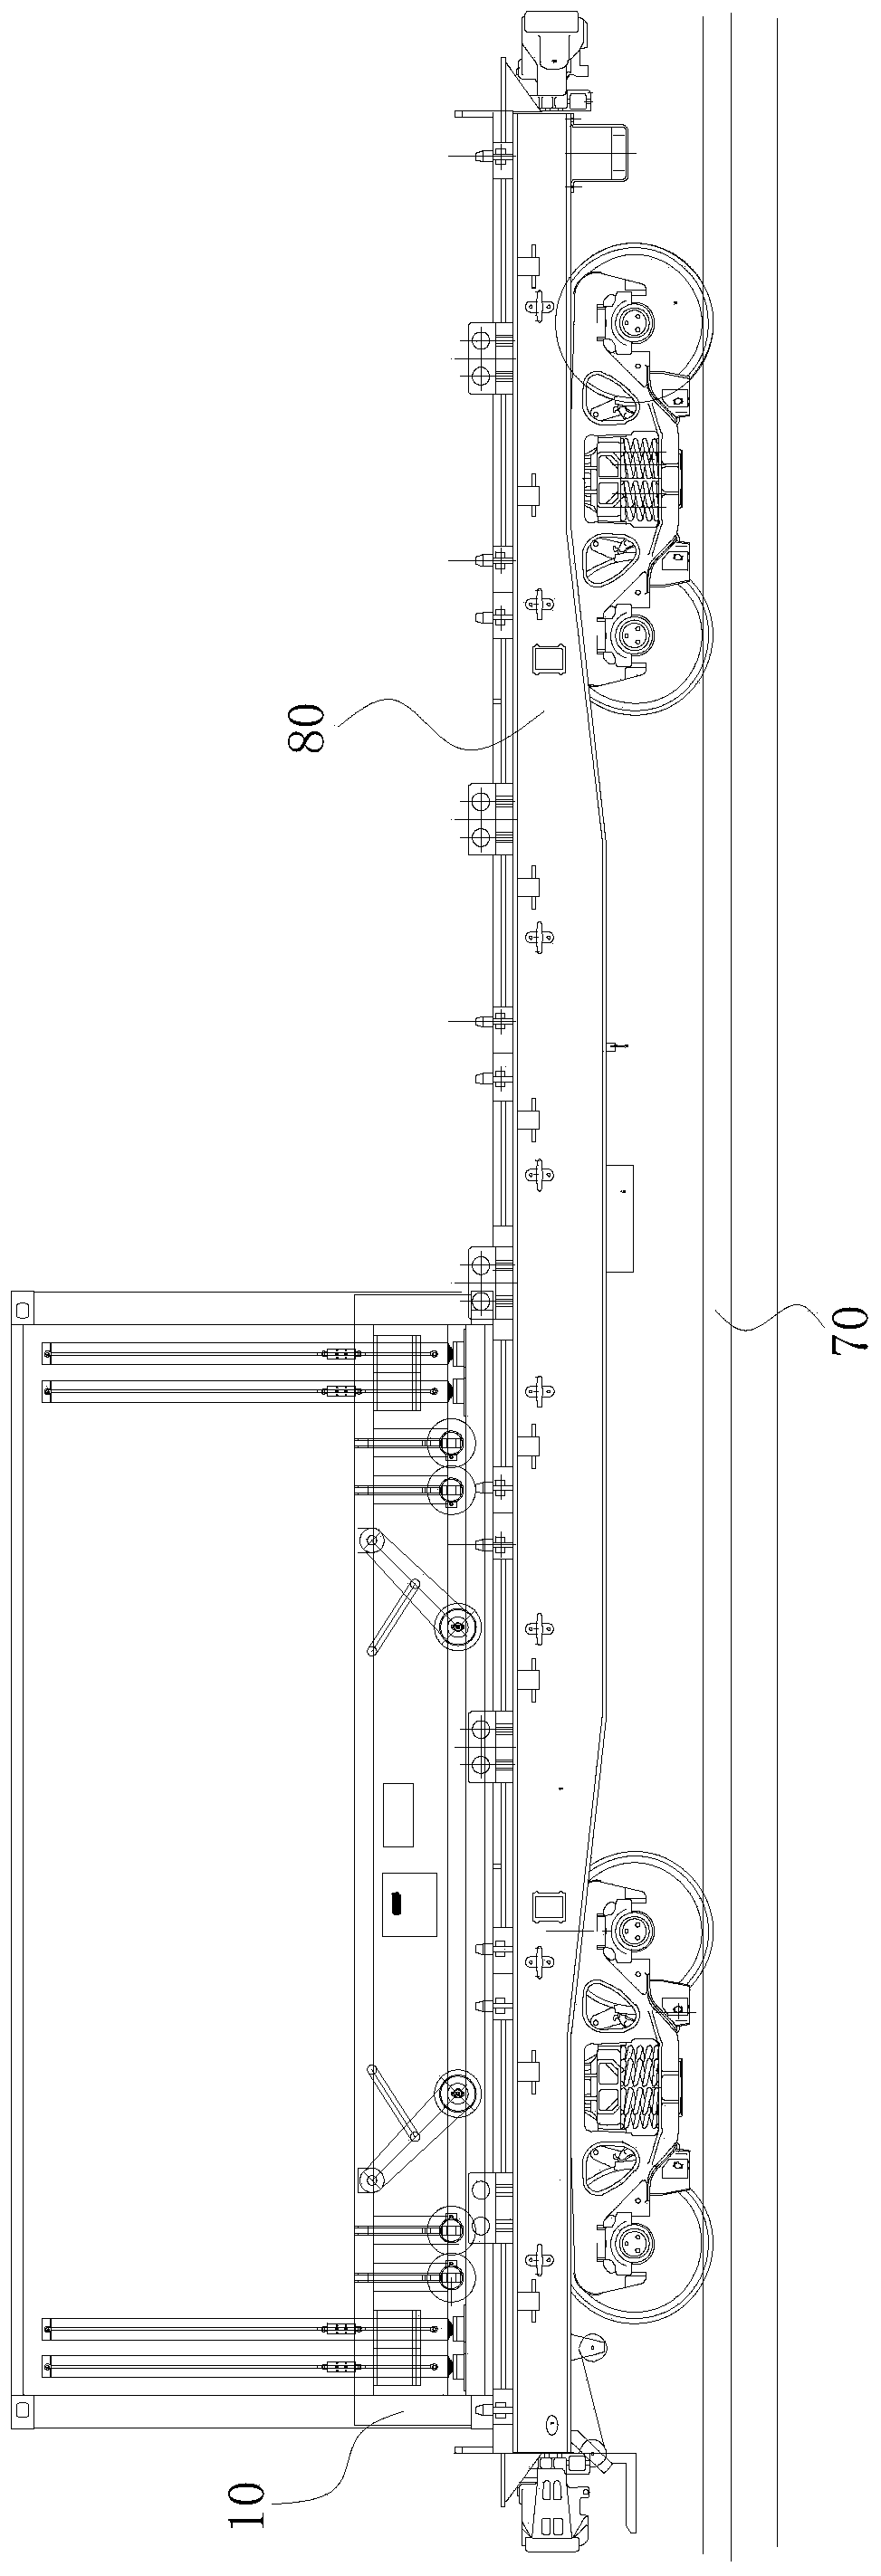 Railway self-loading and unloading multifunctional support equipment and system